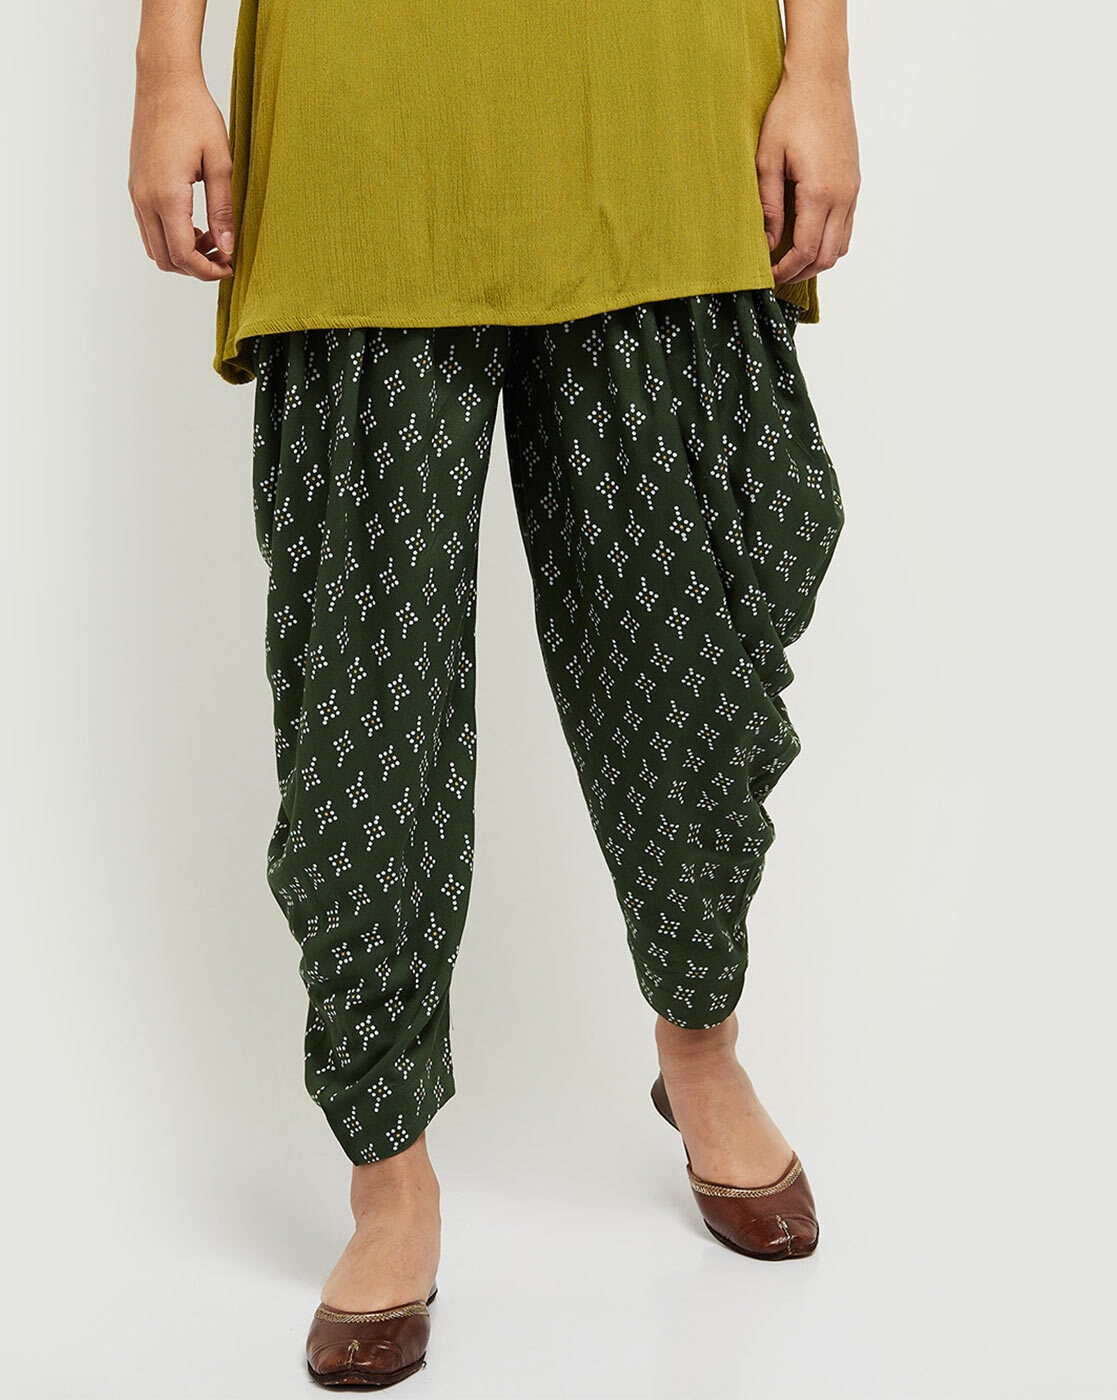 Buy Green Trousers  Pants for Women by MAX Online  Ajiocom